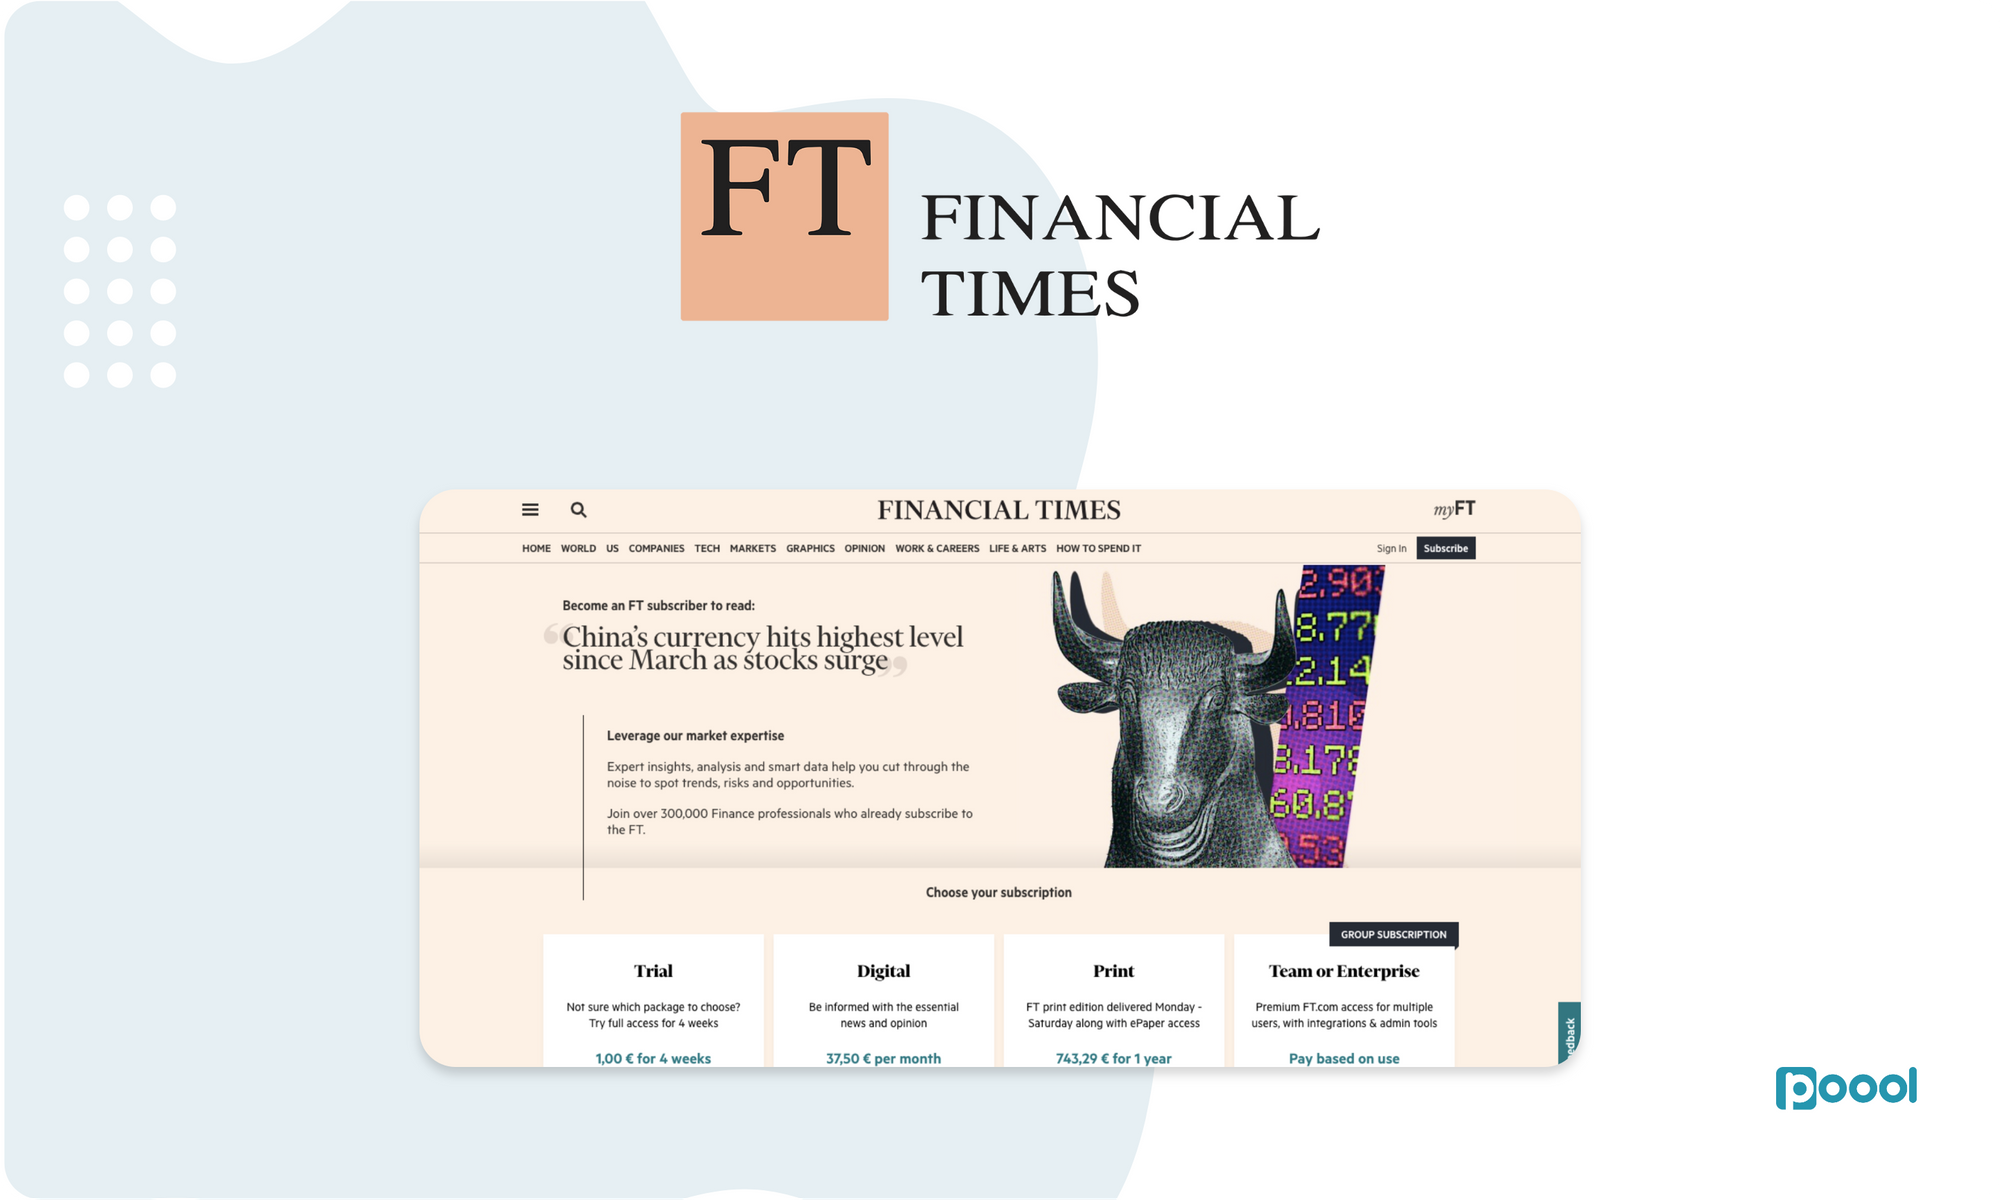 The Financial Times Paywall: From Content, to Subscription to Content | Series.